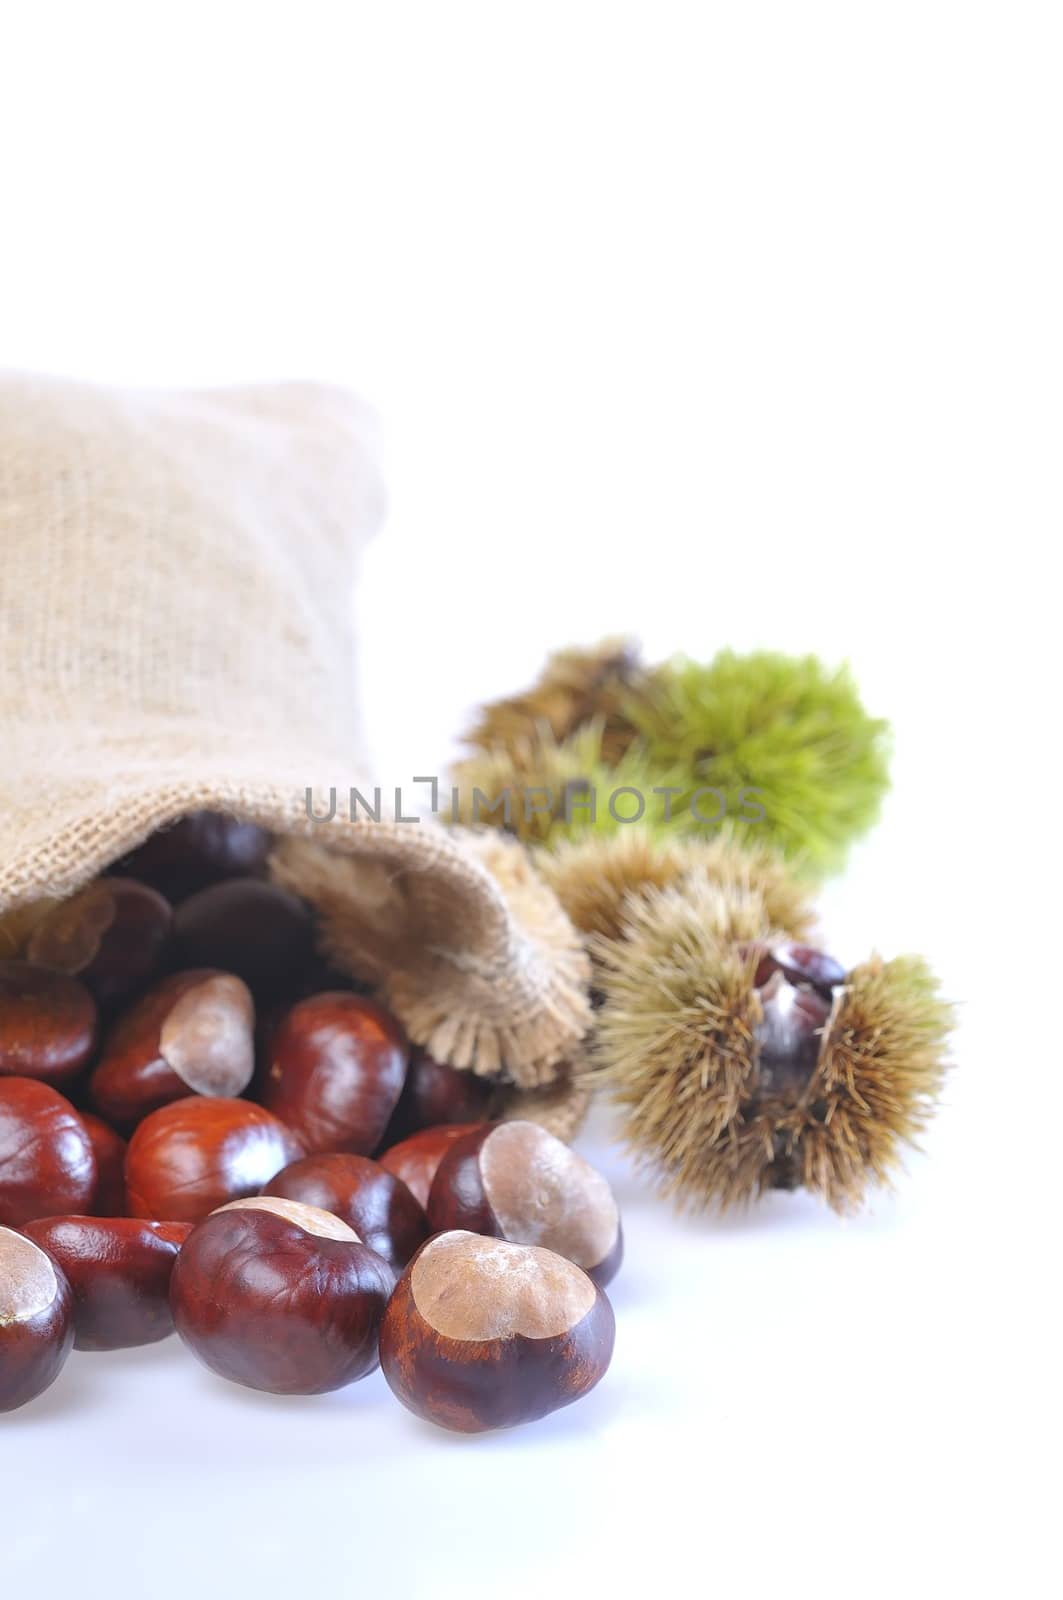 Isolated group of chestnuts on white background